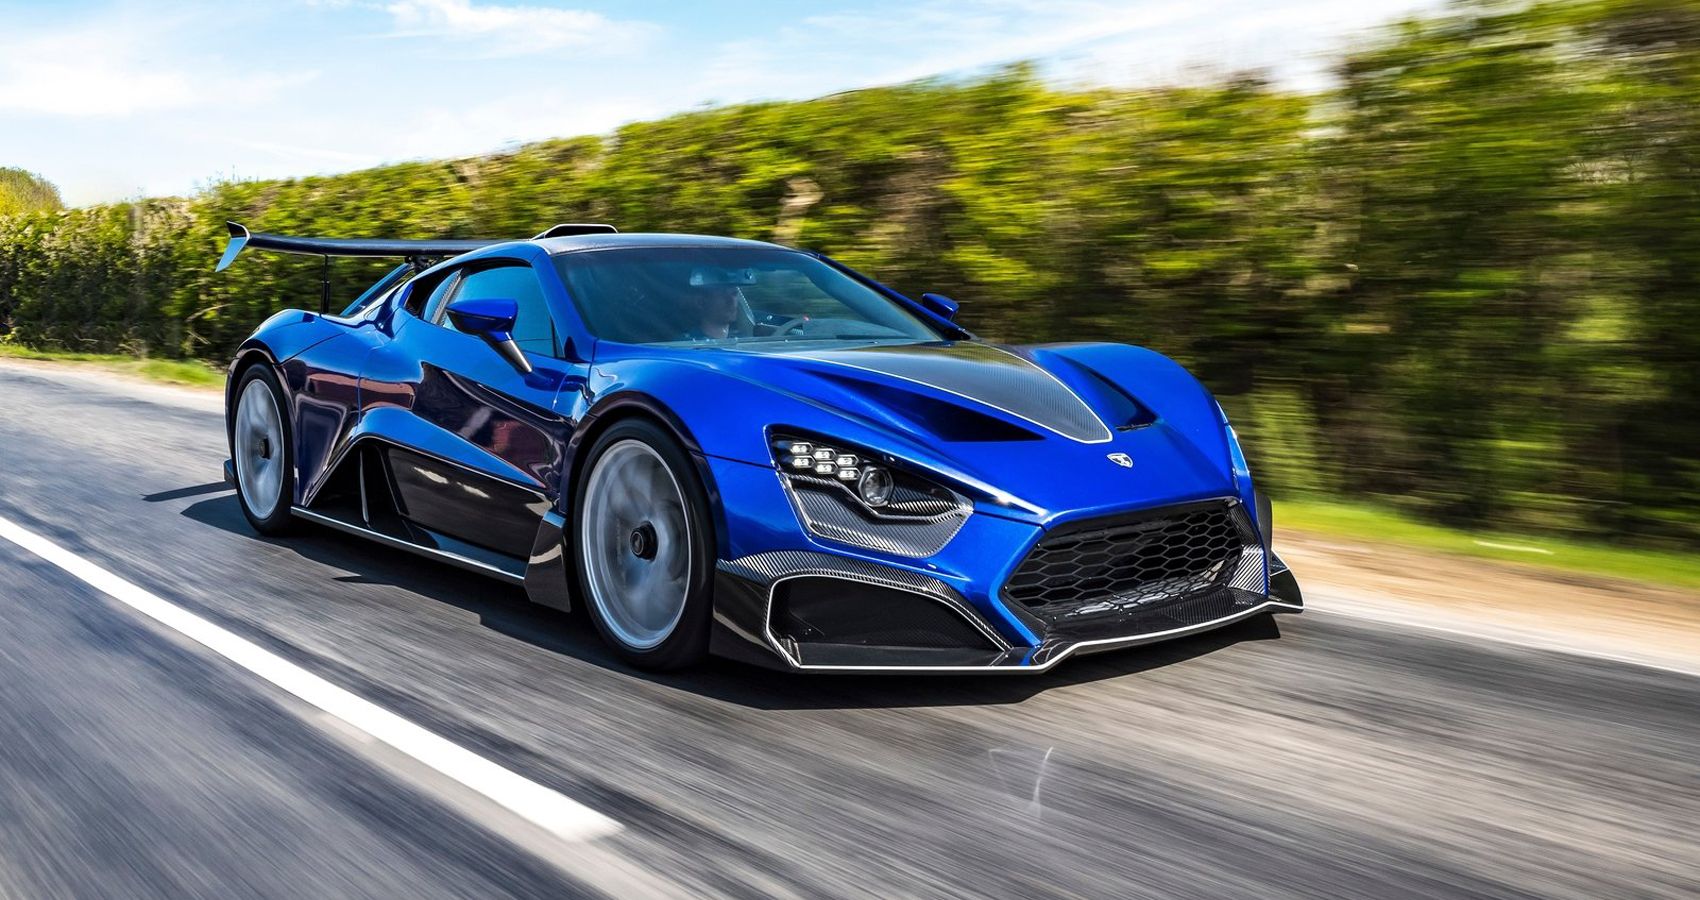 This Is What Makes The Zenvo TSR-S Such An Incredible Hypercar